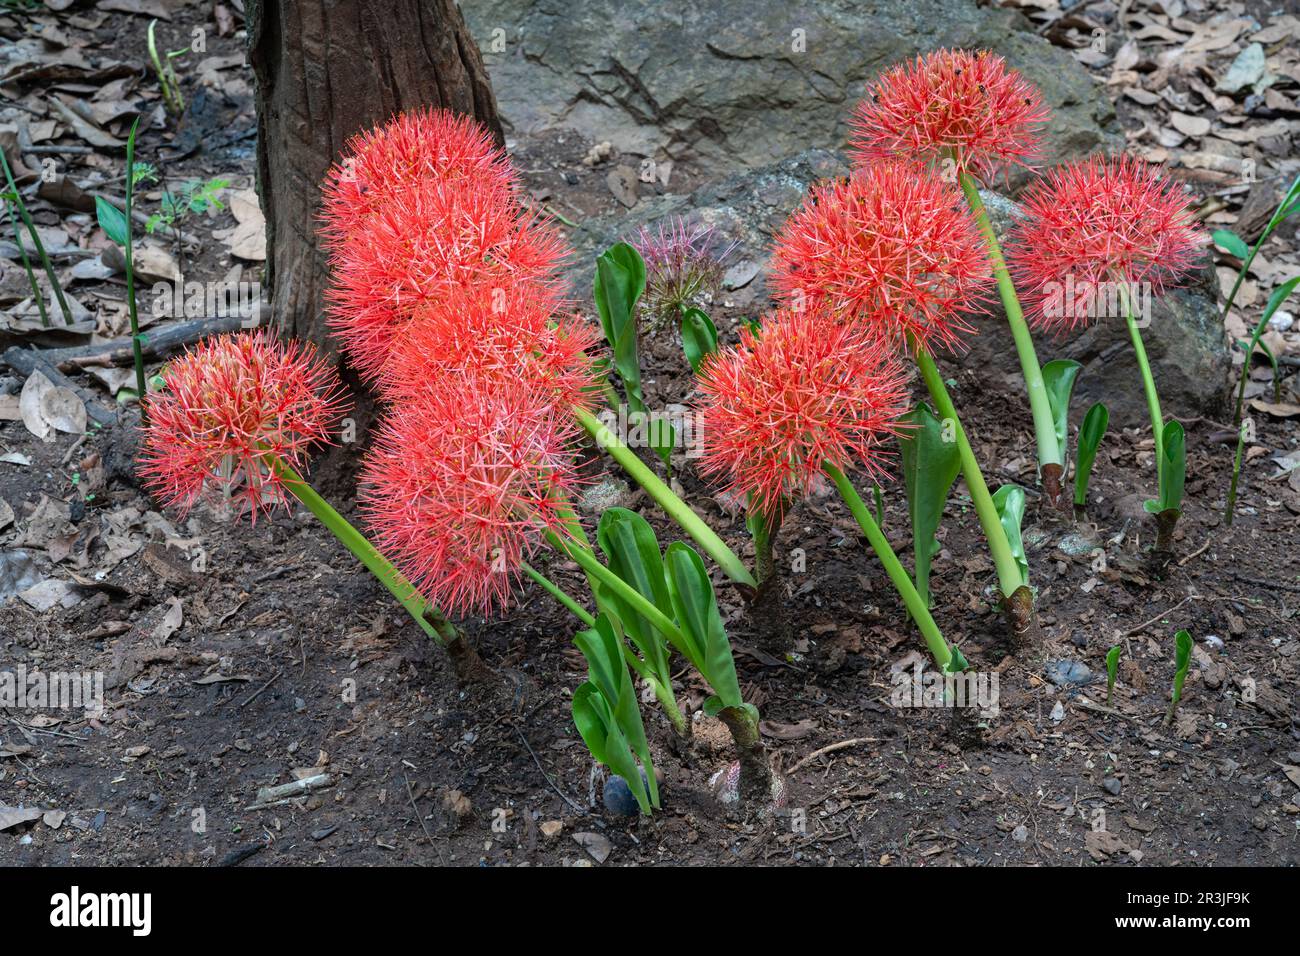 Closeup view of group of orange red flowers of scadoxus multiflorus aka blood lily blooming outdoors in tropical garden Stock Photo